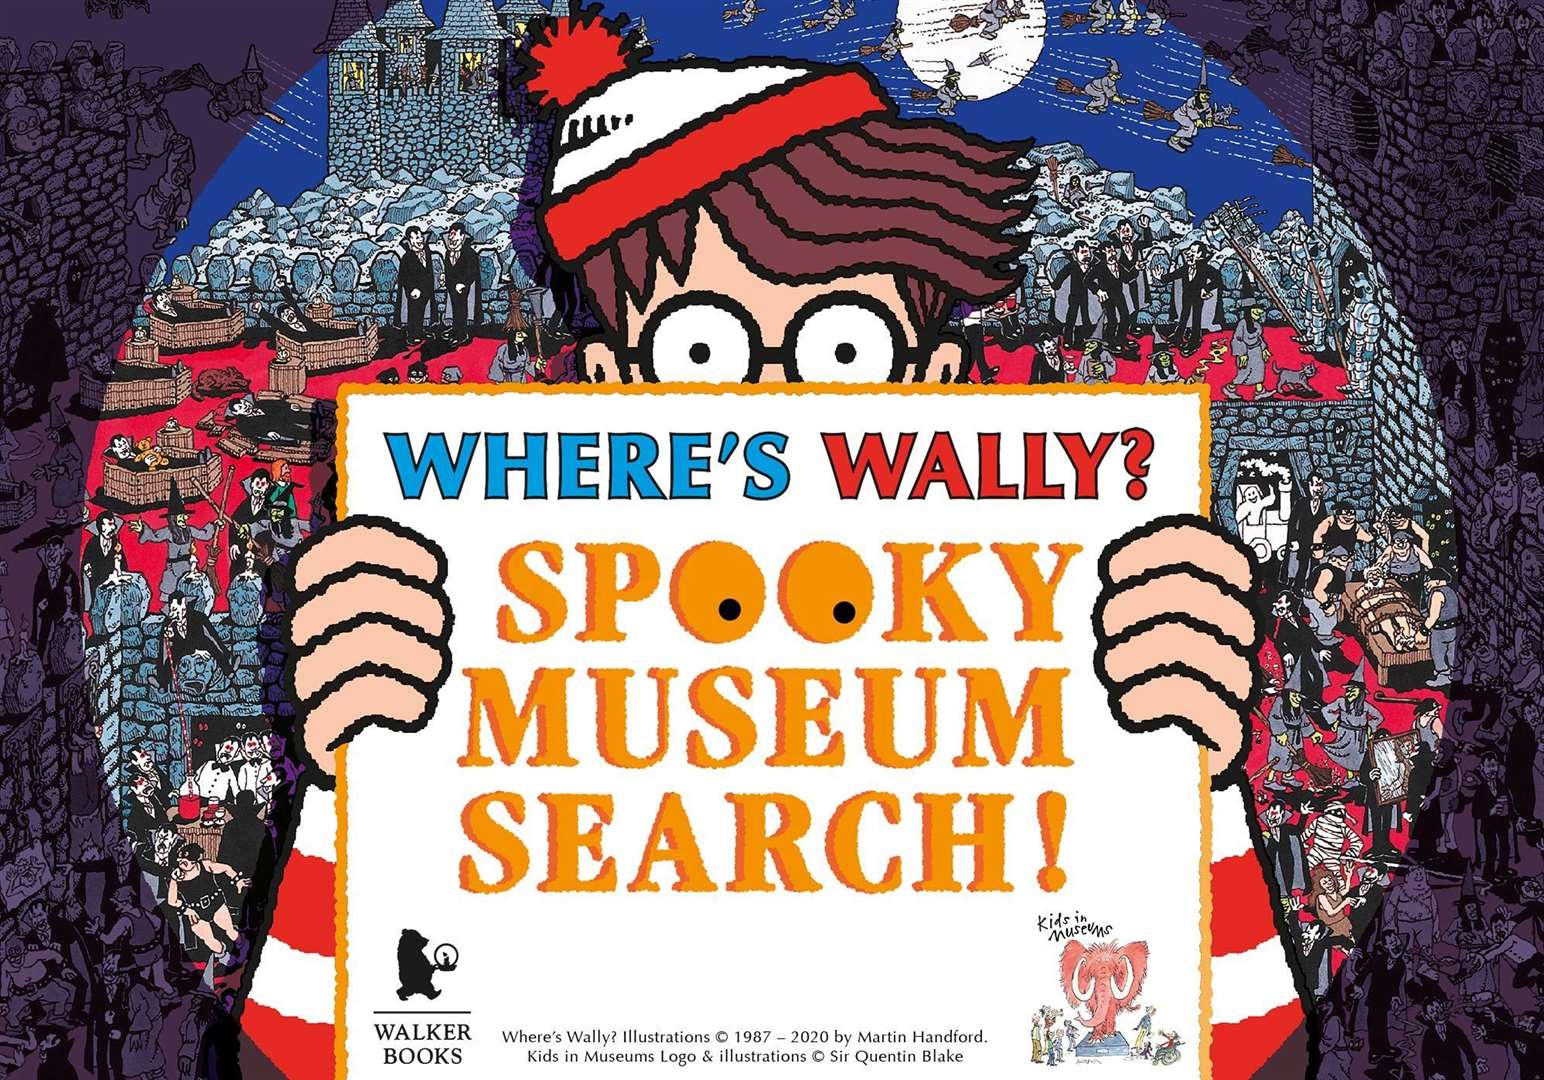 The Where's Wally? Spooky Museum Search is coming to the dockyard in Chatham